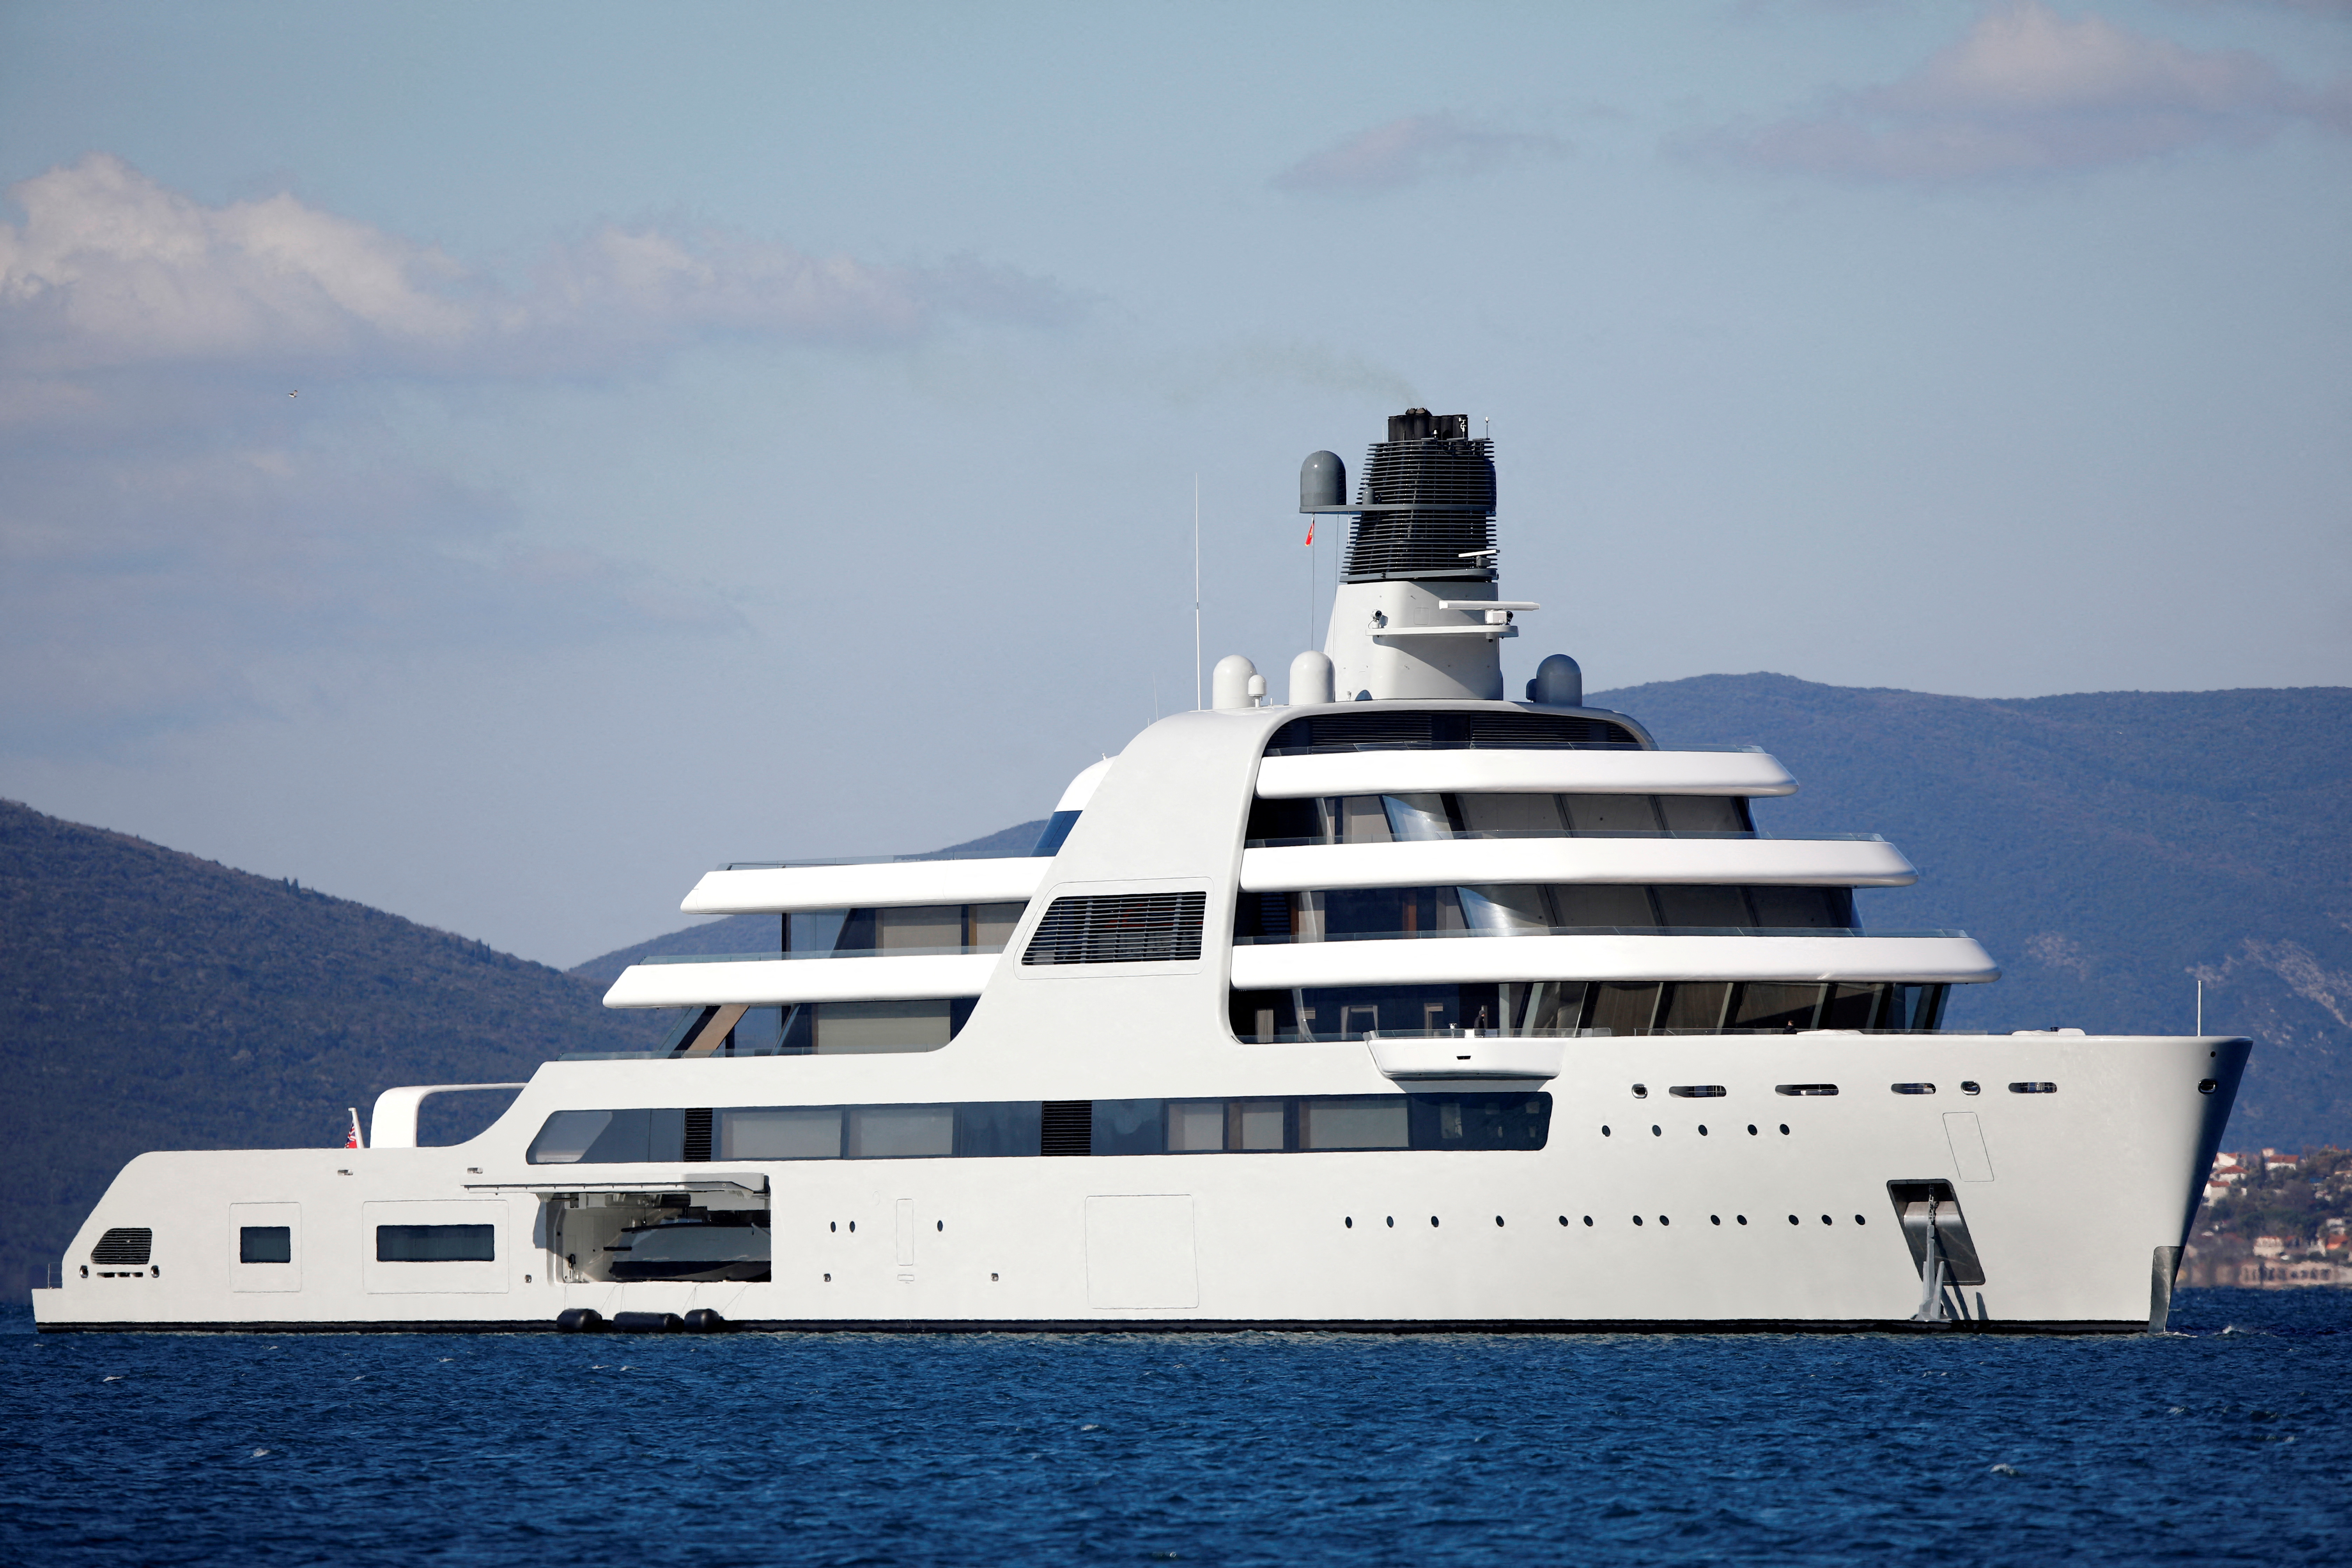 Yacht linked to Russian oligarch Abramovich arrives in Montenegro